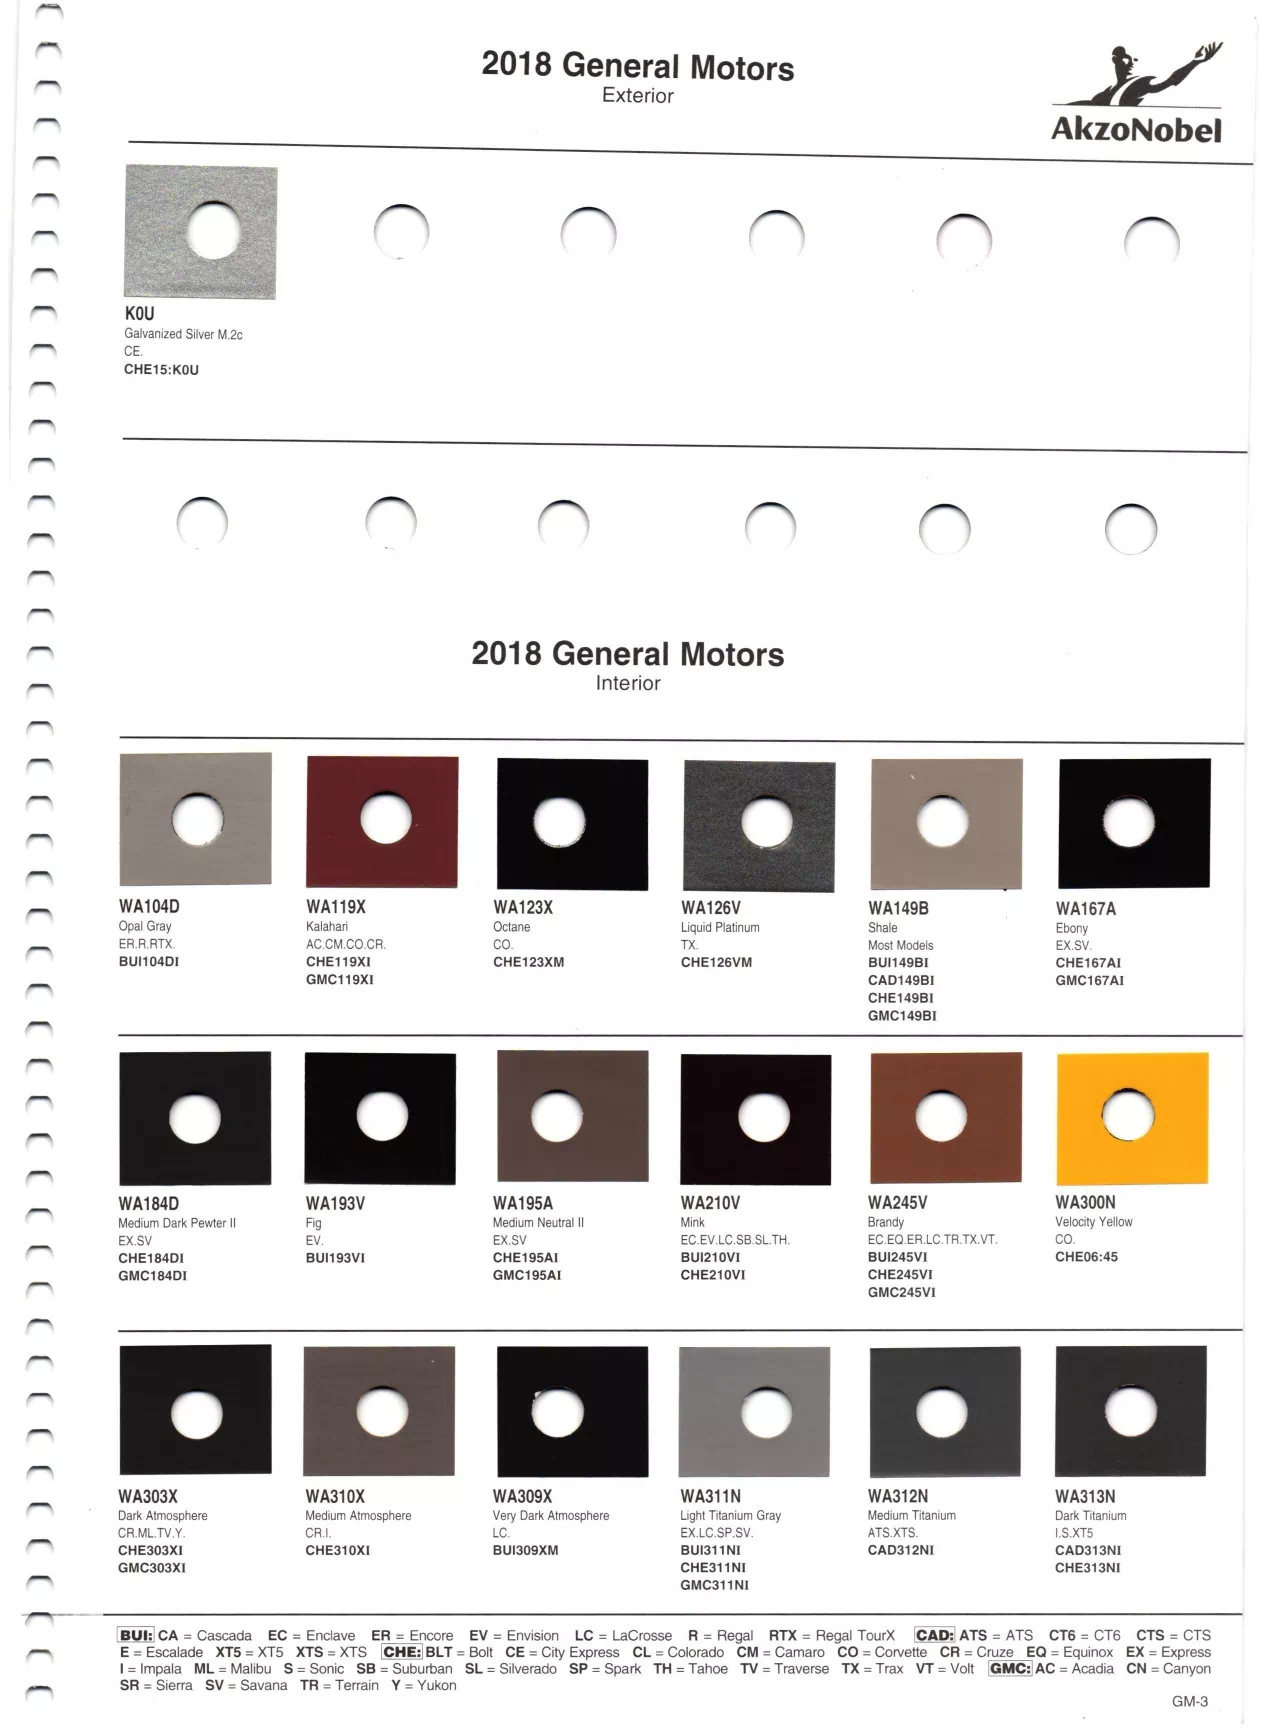 Exterior, Interior & Wheel Colors used on Buick, Cadillac Chevrolet & GMC Vehicles in 2018